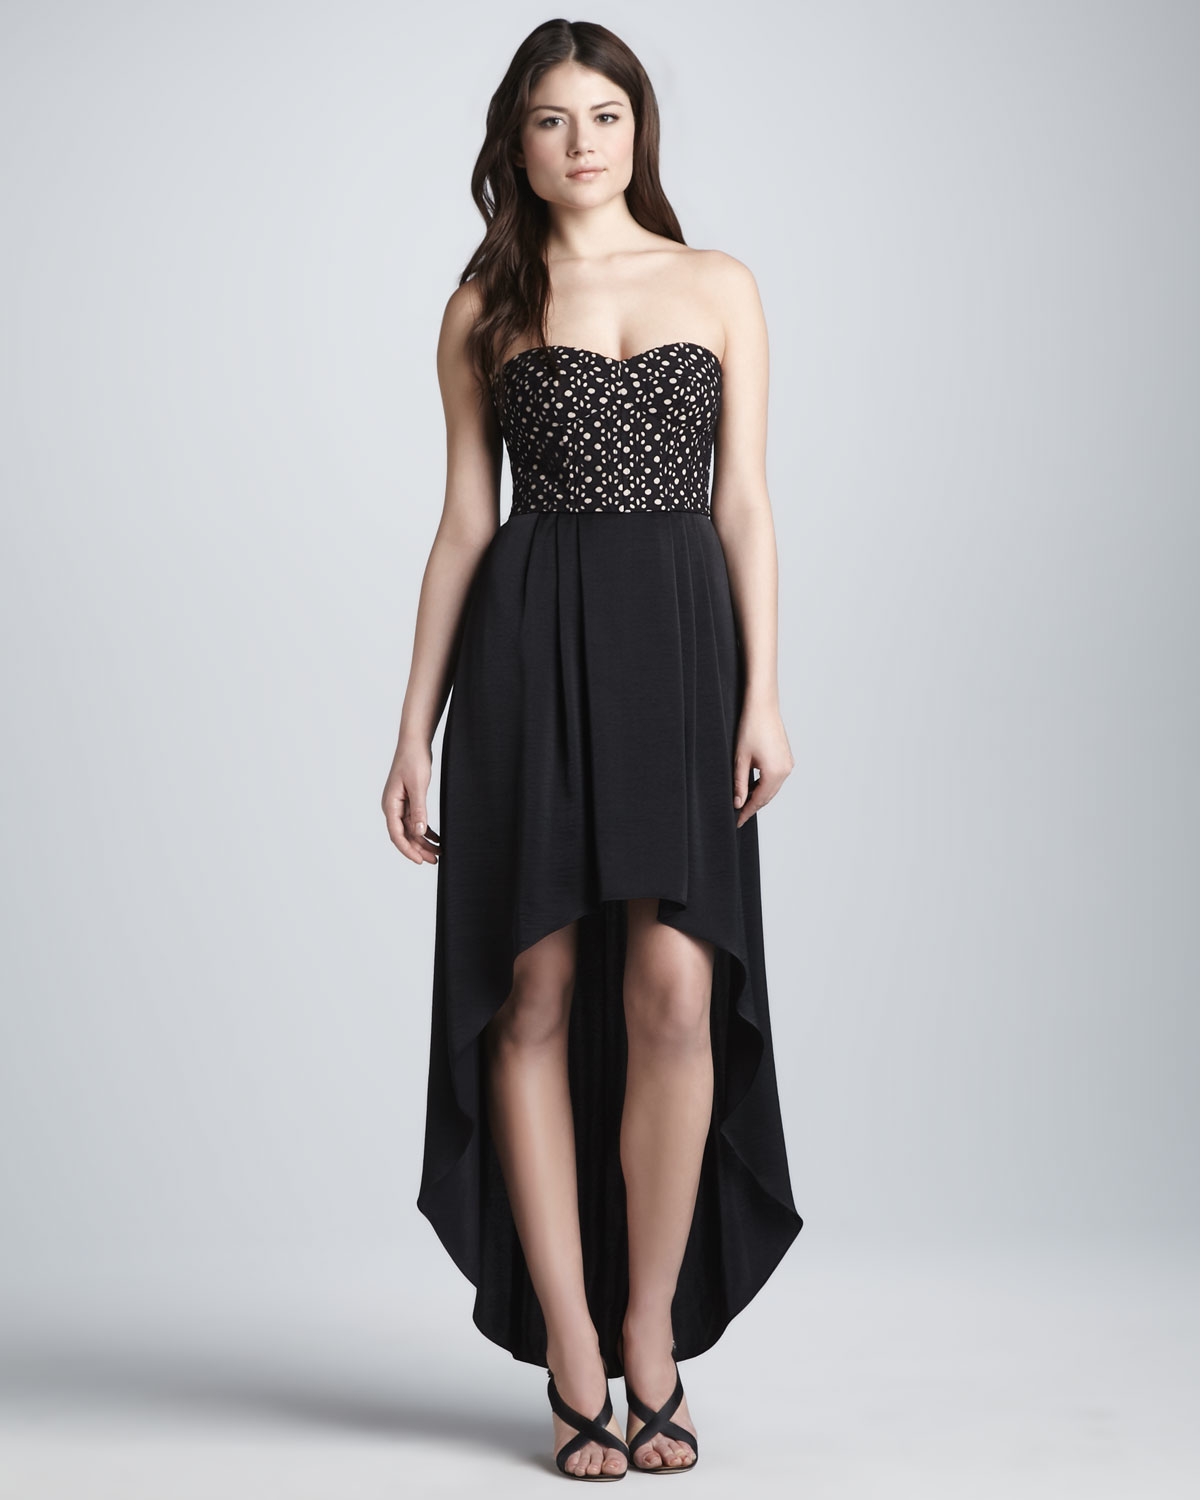 Strapless High Low Dress | Dressed Up Girl